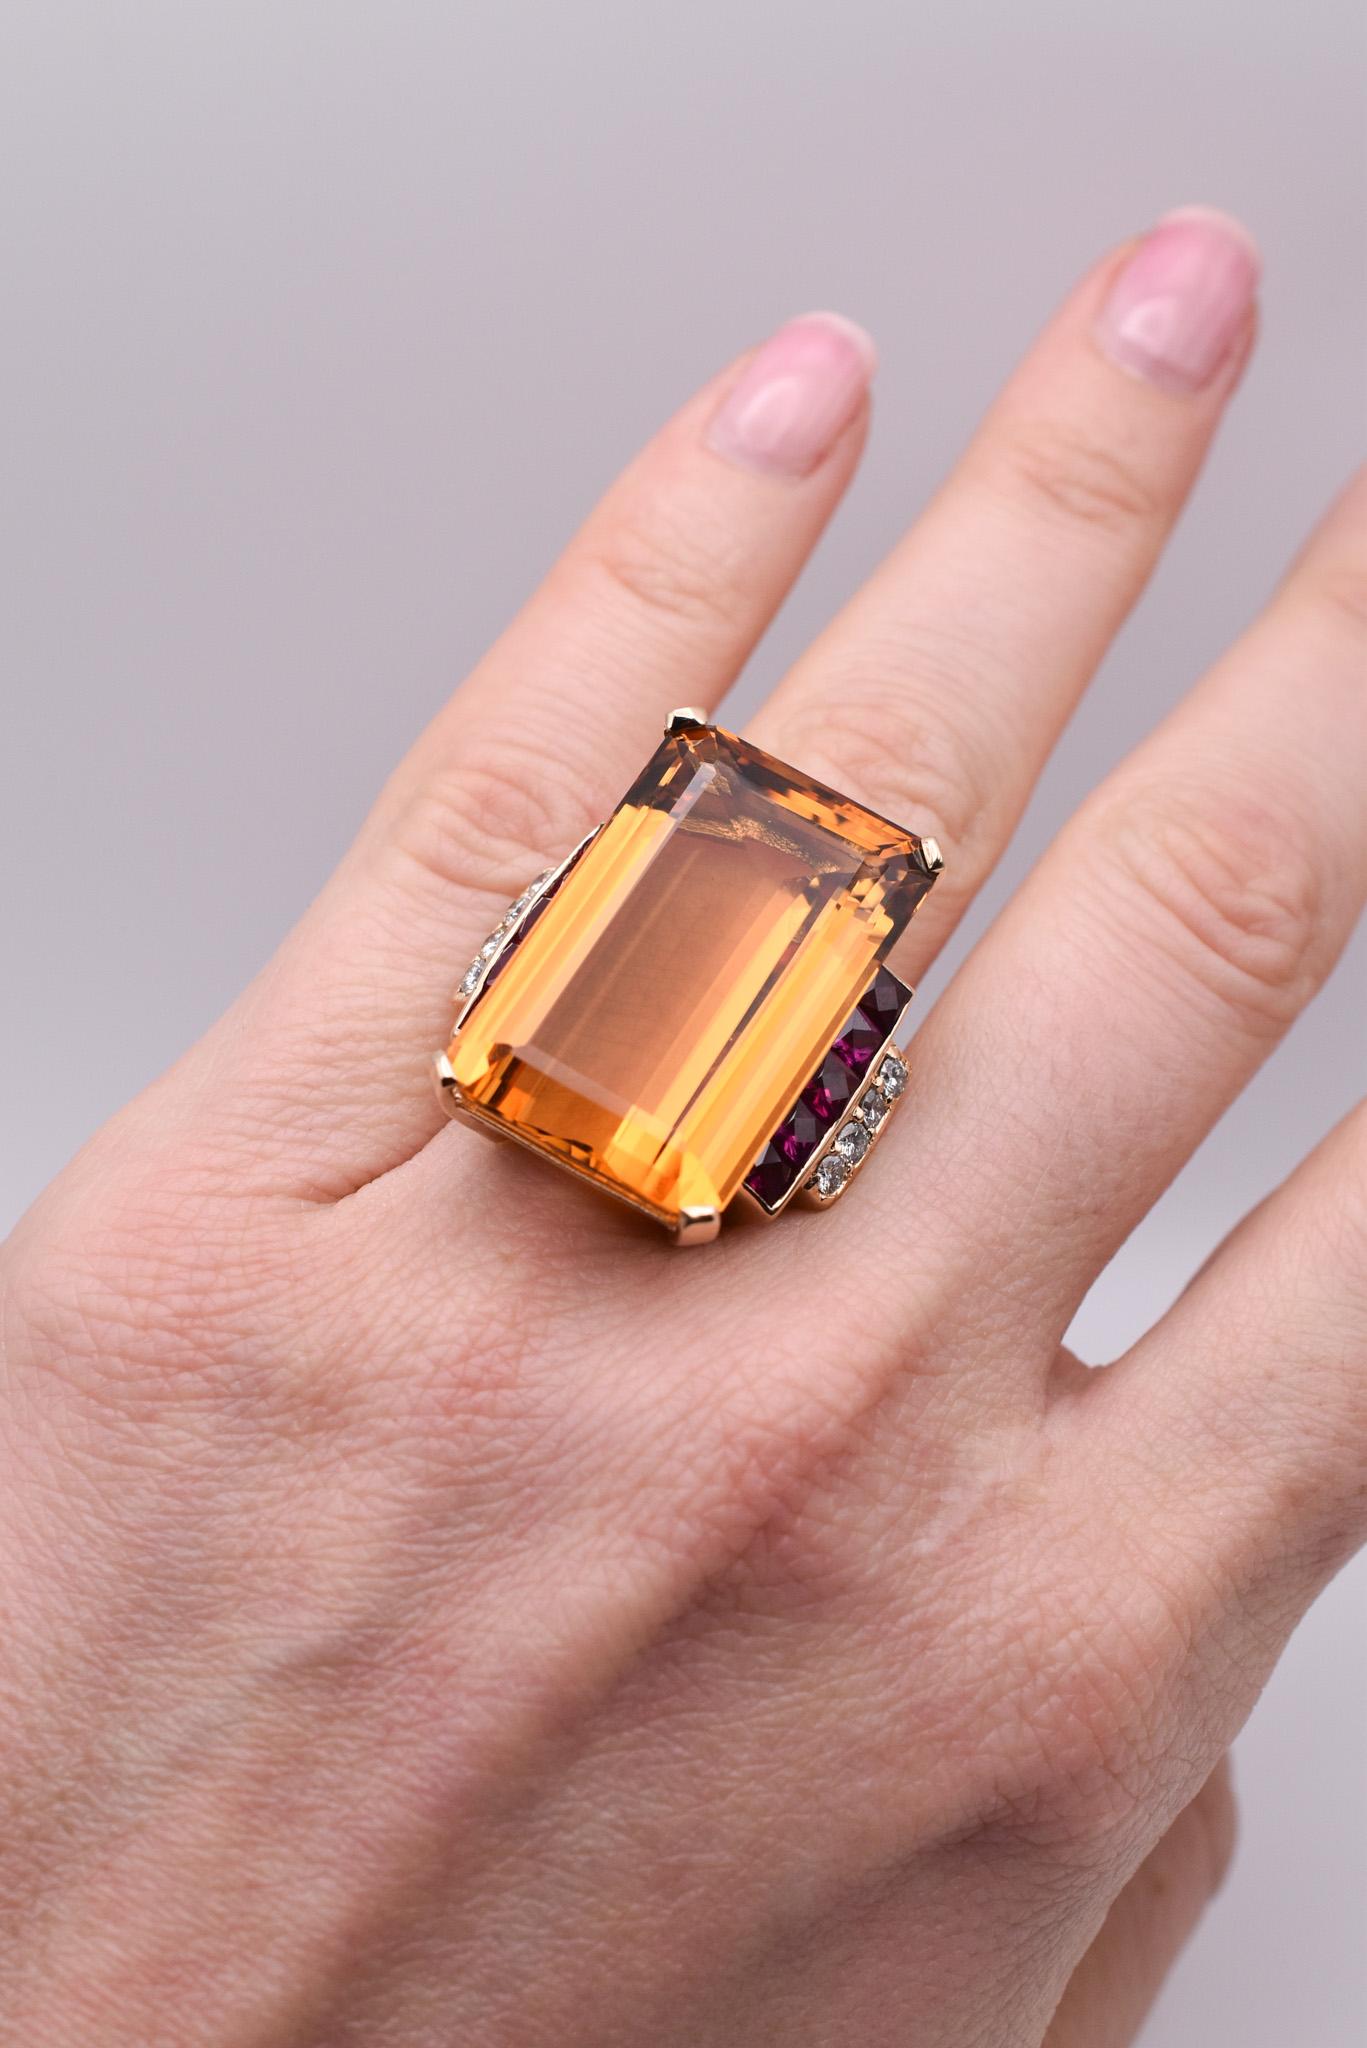 A Large Citrine Cocktail Ring in 18K Yellow Gold, showcasing an emerald-cut citrine weighing approximately 33.50 carats further embellished with Diamonds and Synthetic Ruby Accents. Made in America, circa 1950.